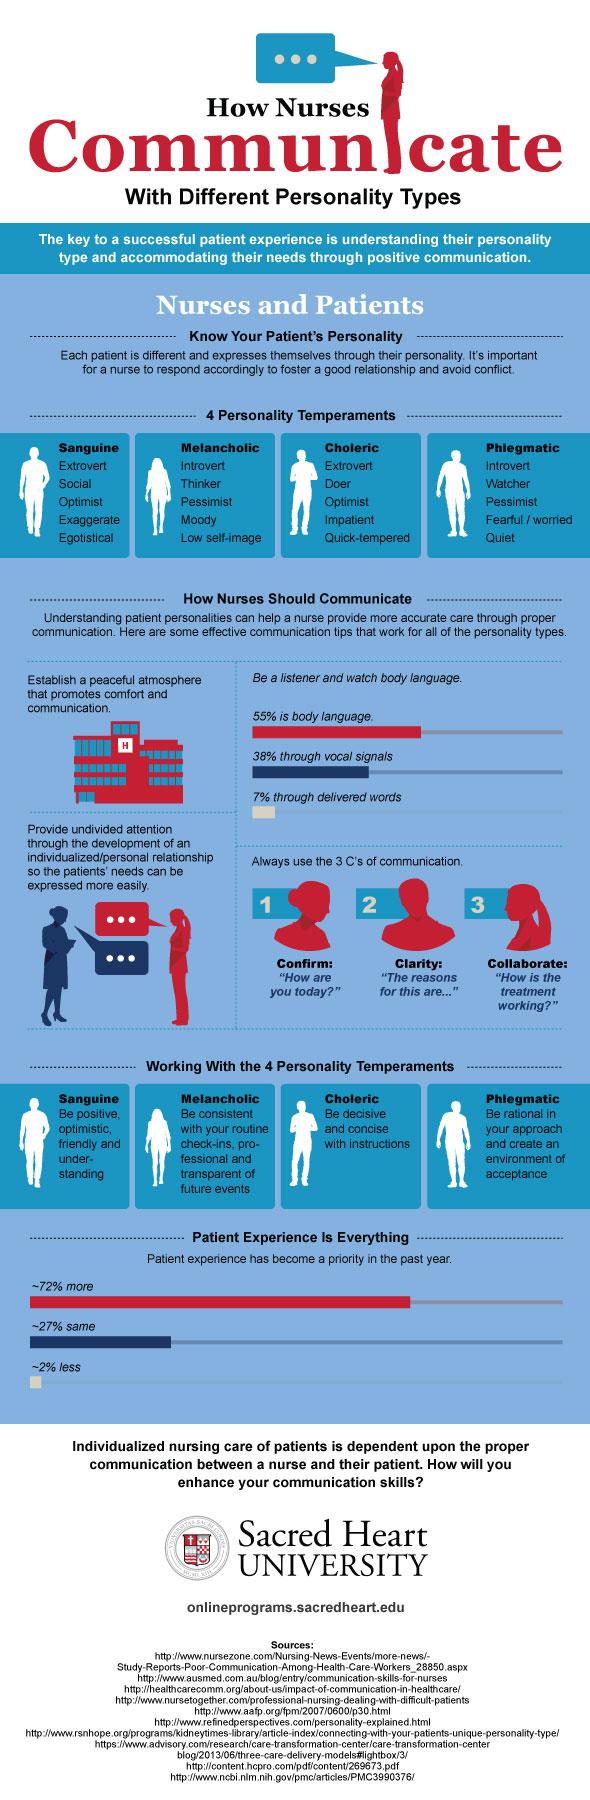 Infographic to help nurses communicate with patients based on 4 major personality temperaments.